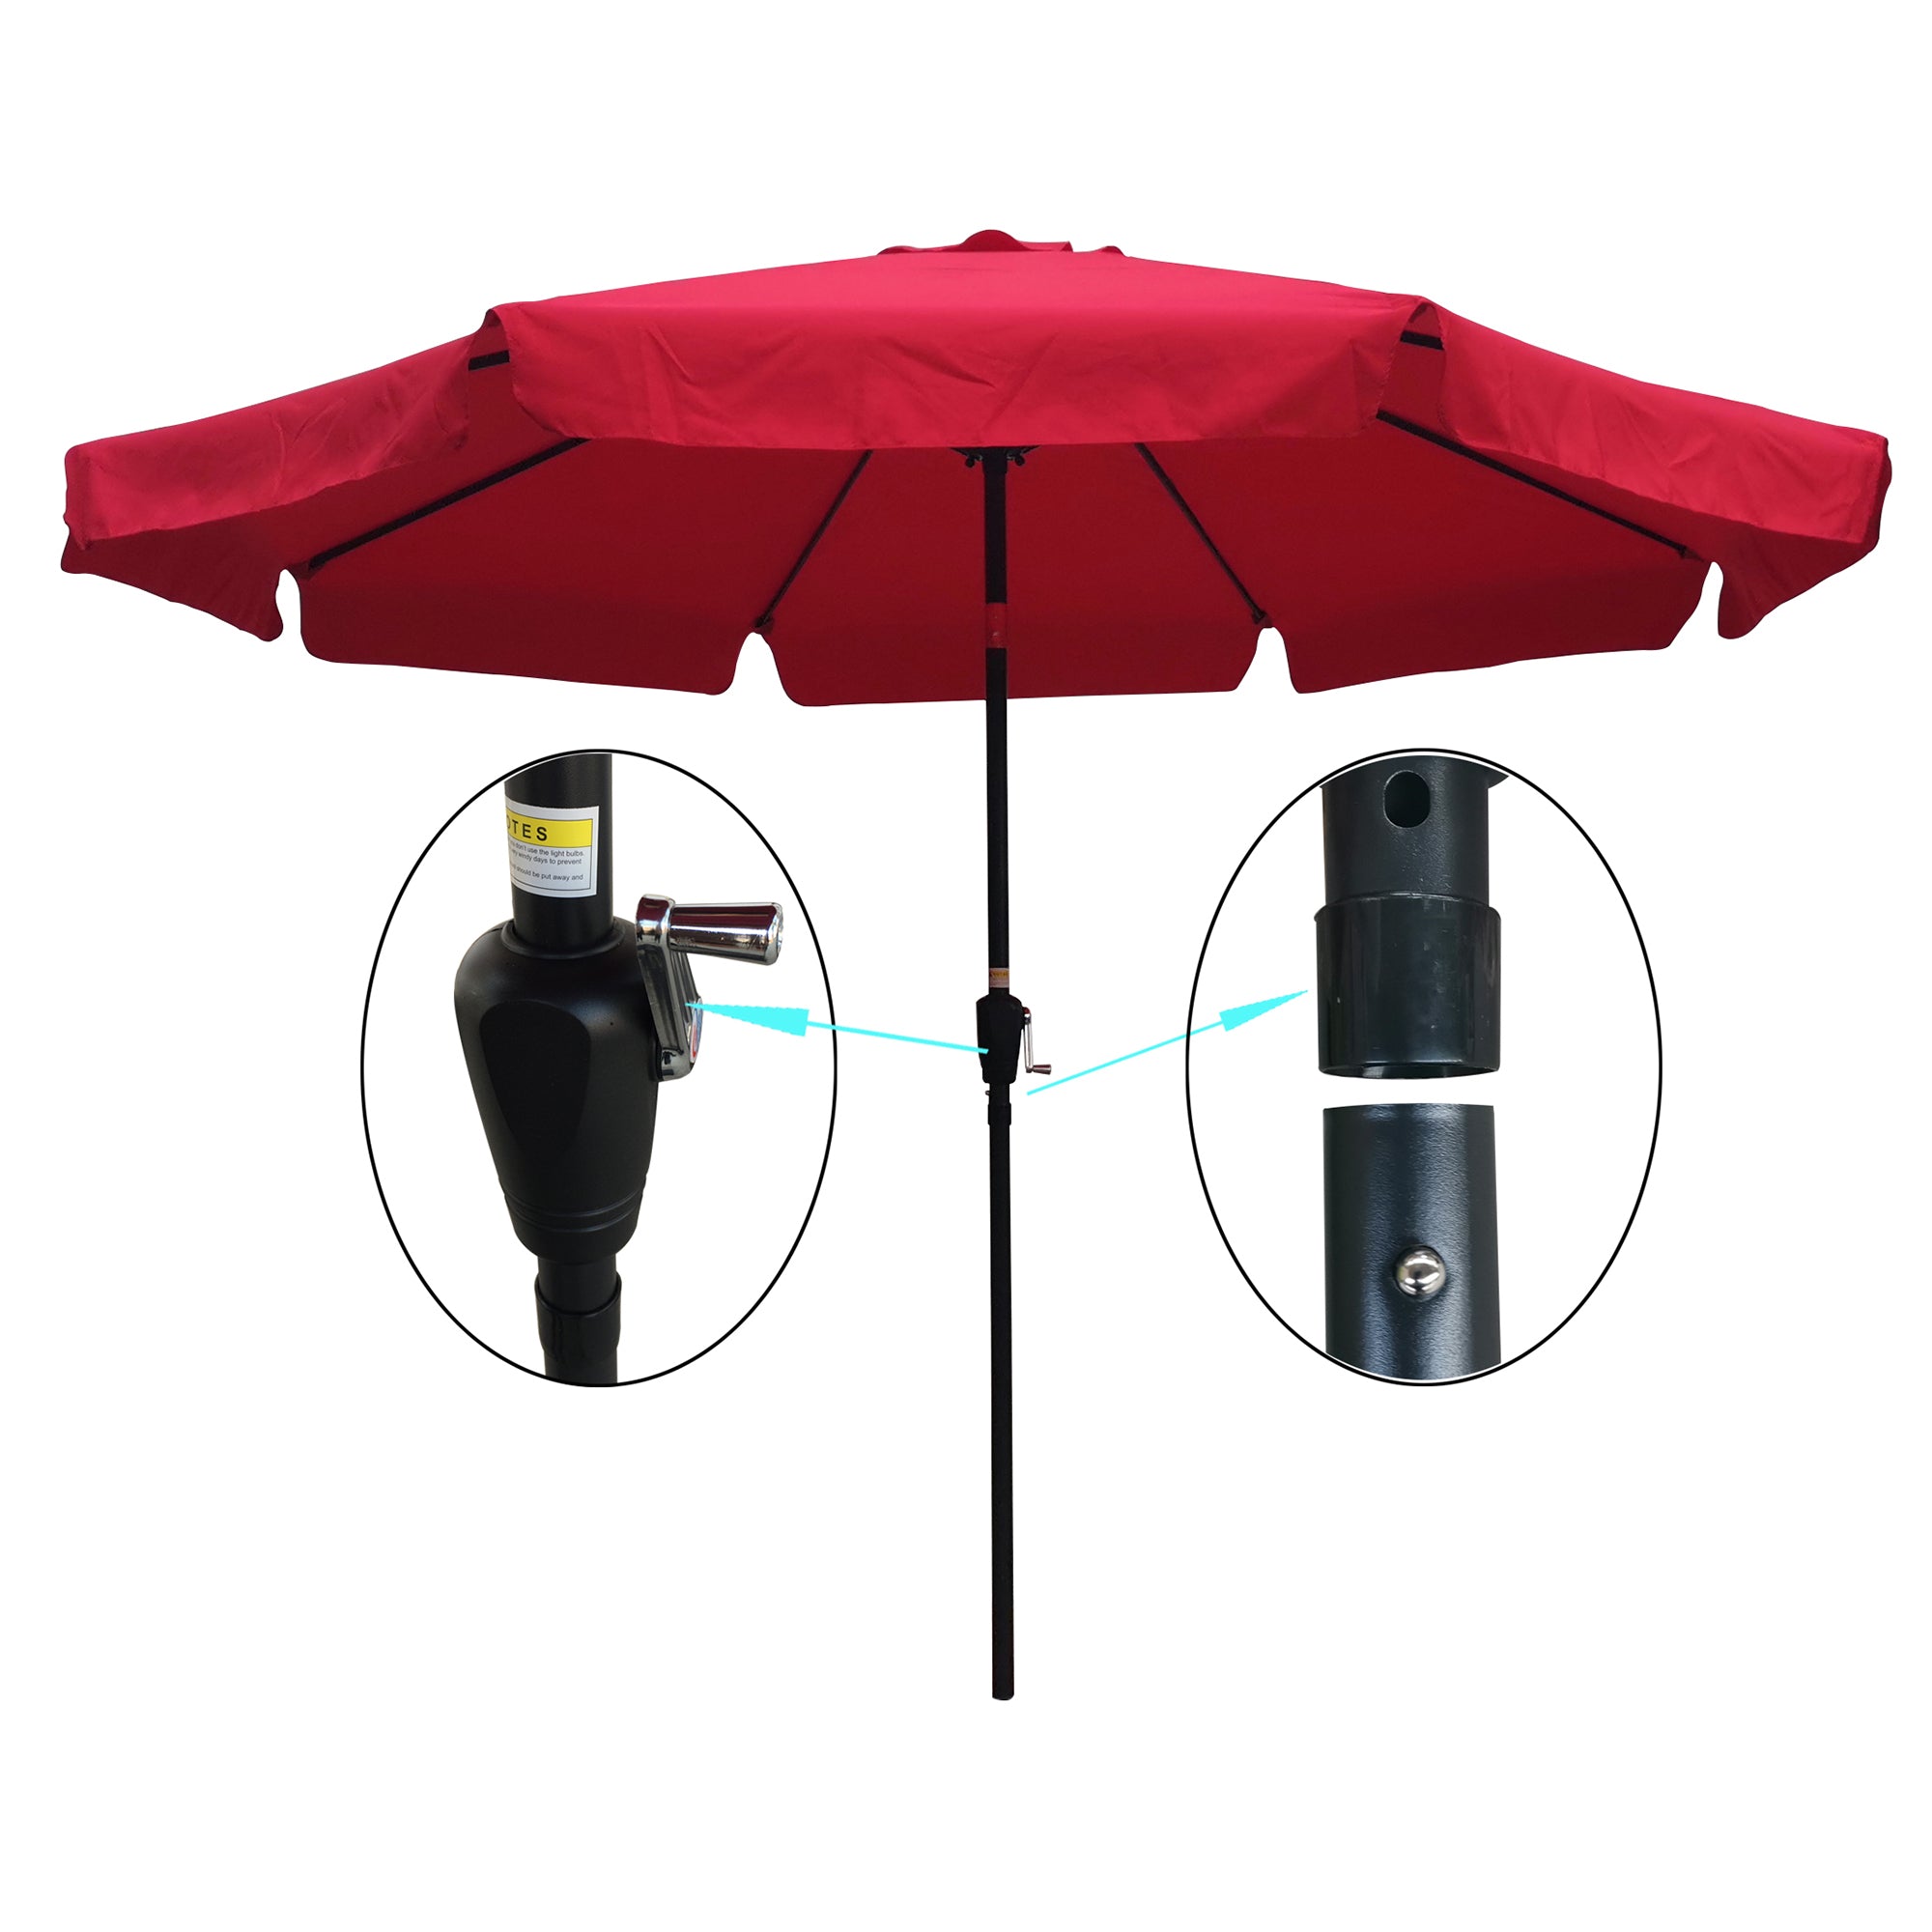 10 ft. Outdoor Patio Umbrella with 8pcs ribs and crank with Push Button Tilt